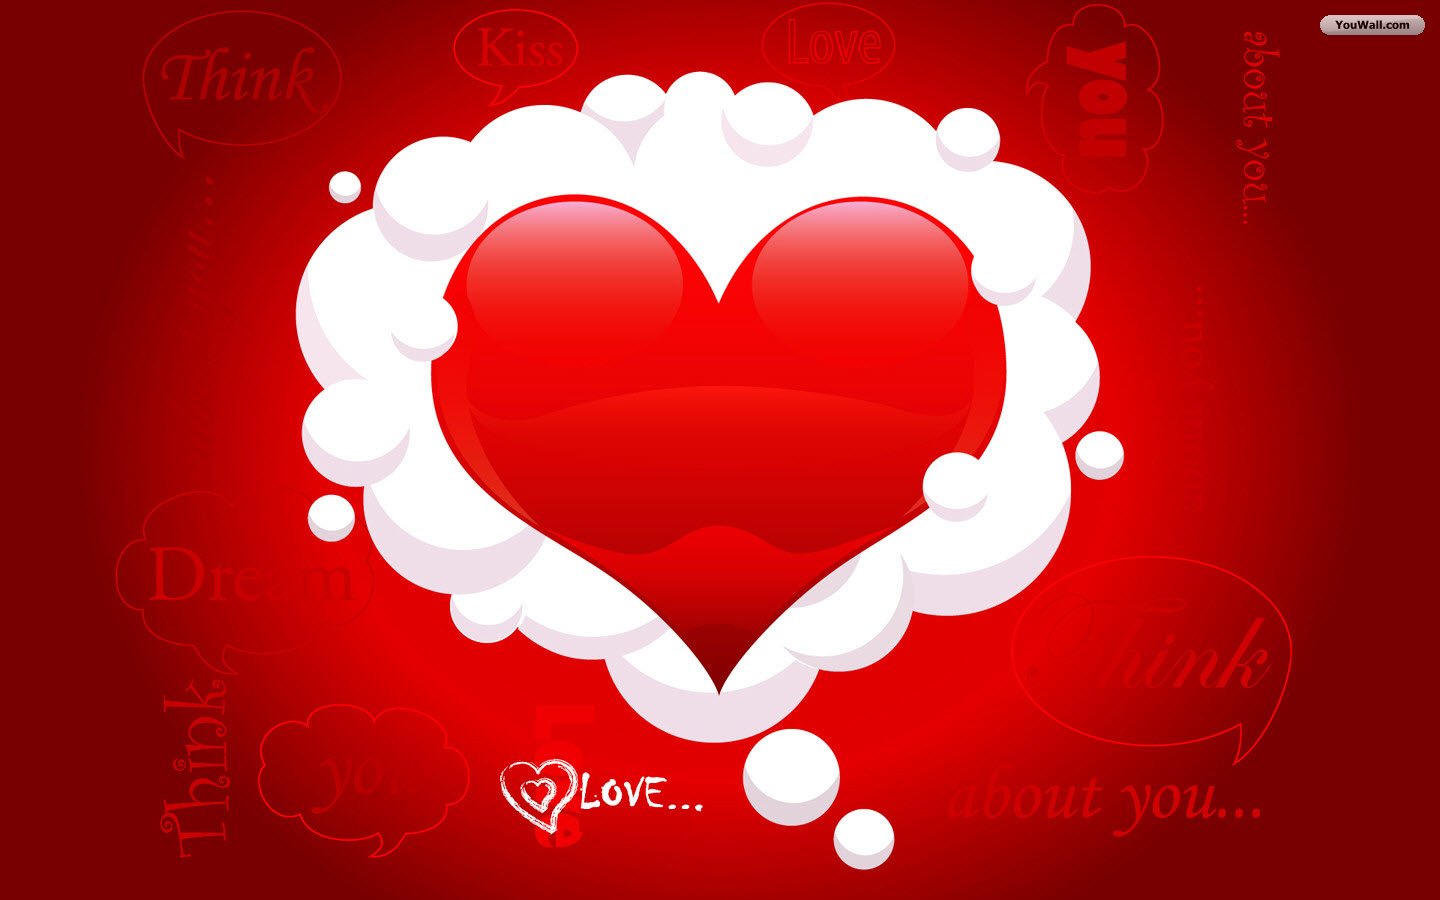 Love Heart Images, Pictures, Wallpaper Download Free